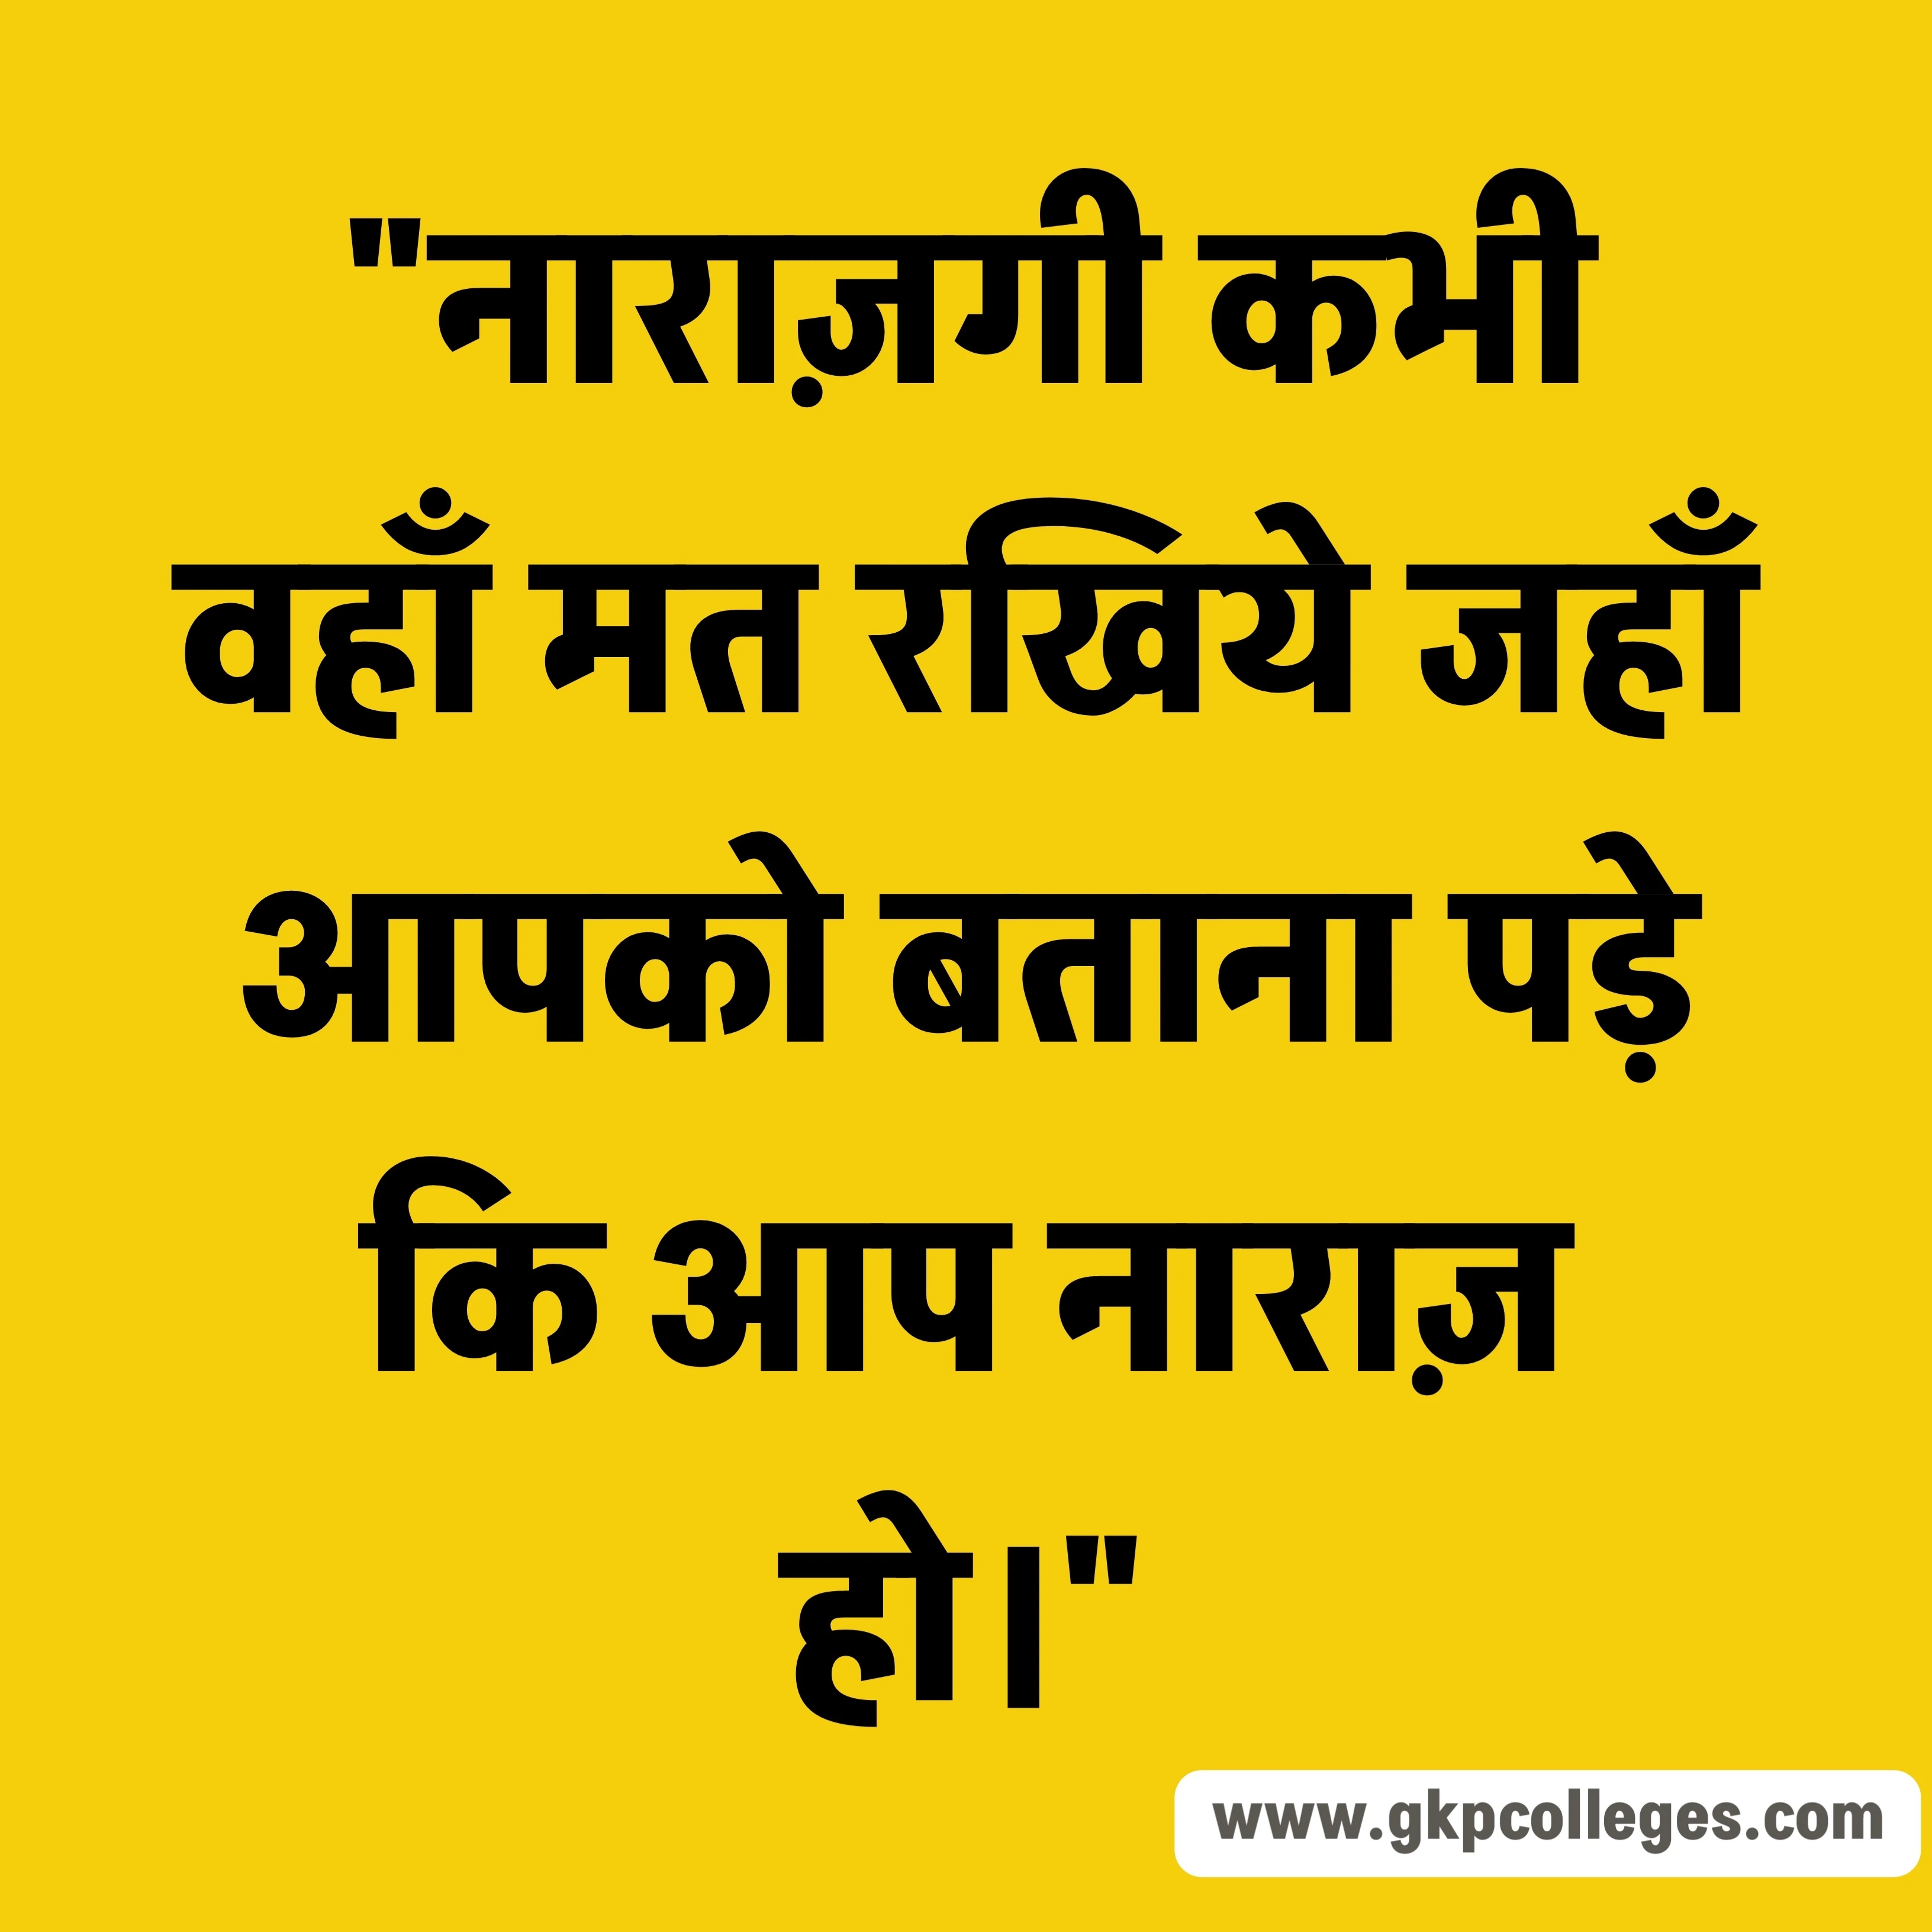 Best Hindi Quotes on Life 2